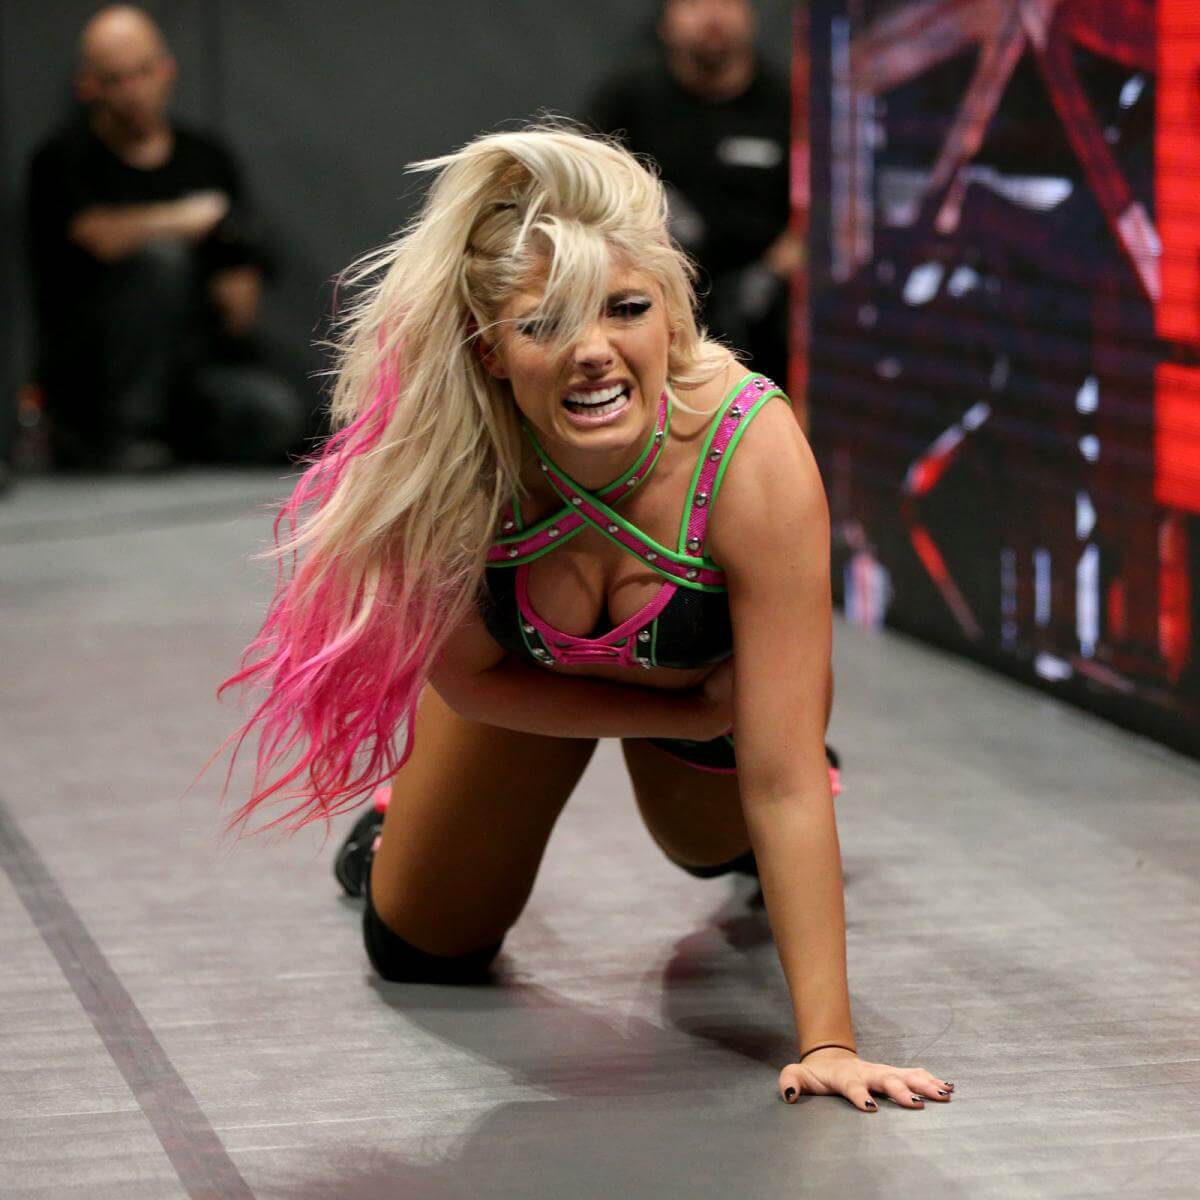 49 Hot Pictures Of Alexa Bliss Which Are Just Too Damn Cute And Sexy At The Same Time | Best Of Comic Books